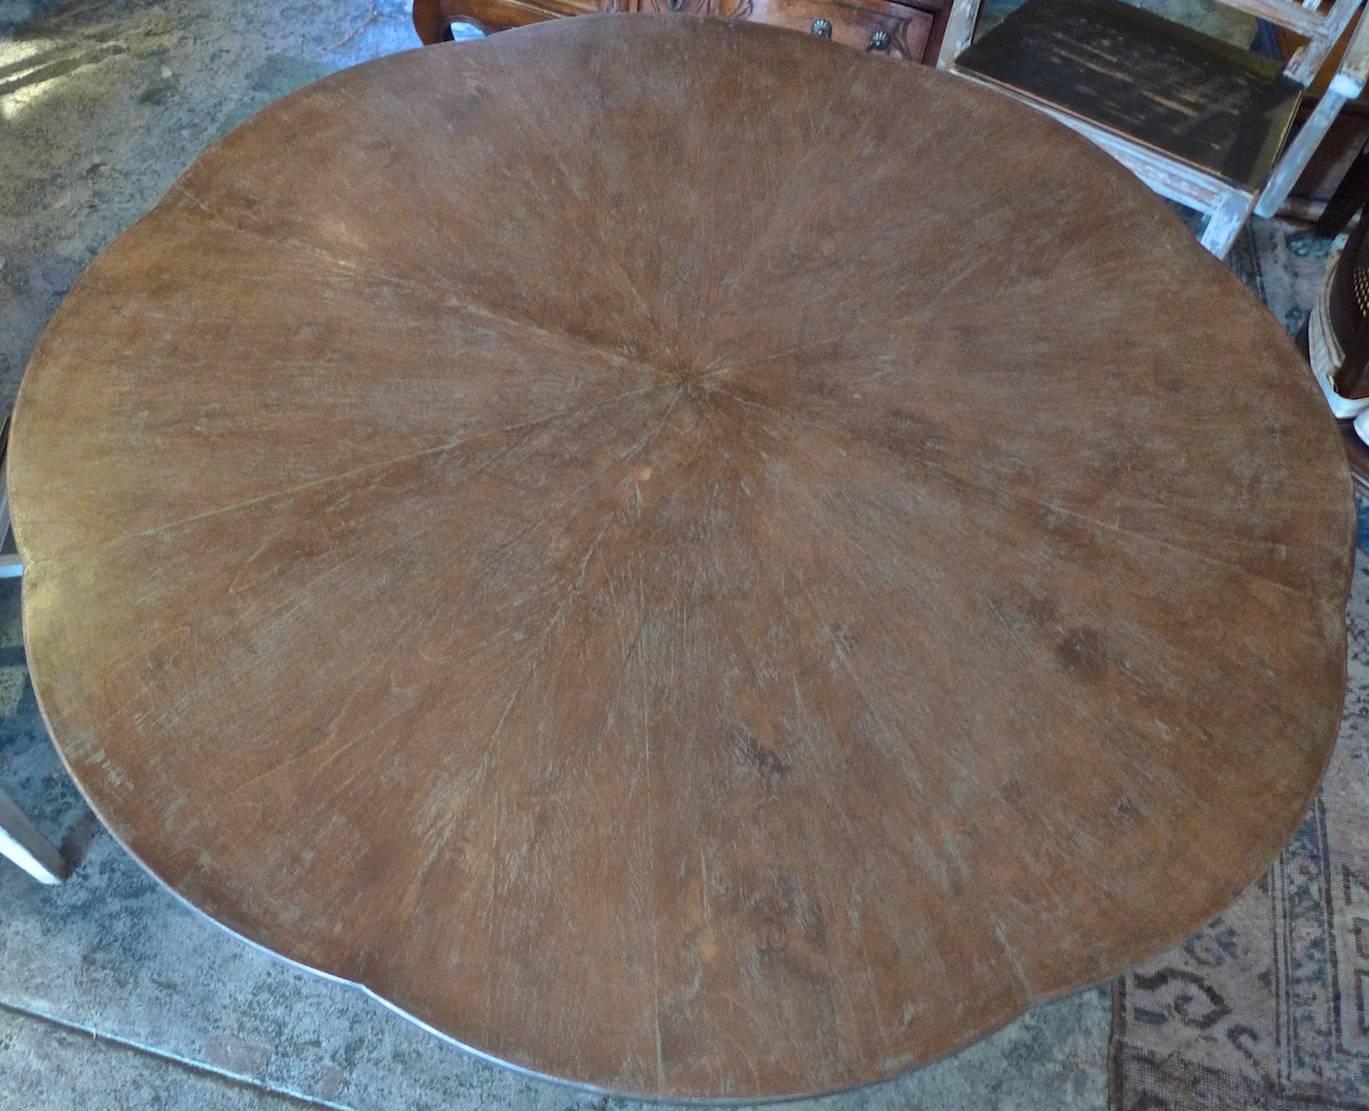 Reproduction 19th Century Style Stained Carved Wood Pedestal Breakfast Table In Excellent Condition For Sale In Santa Monica, CA